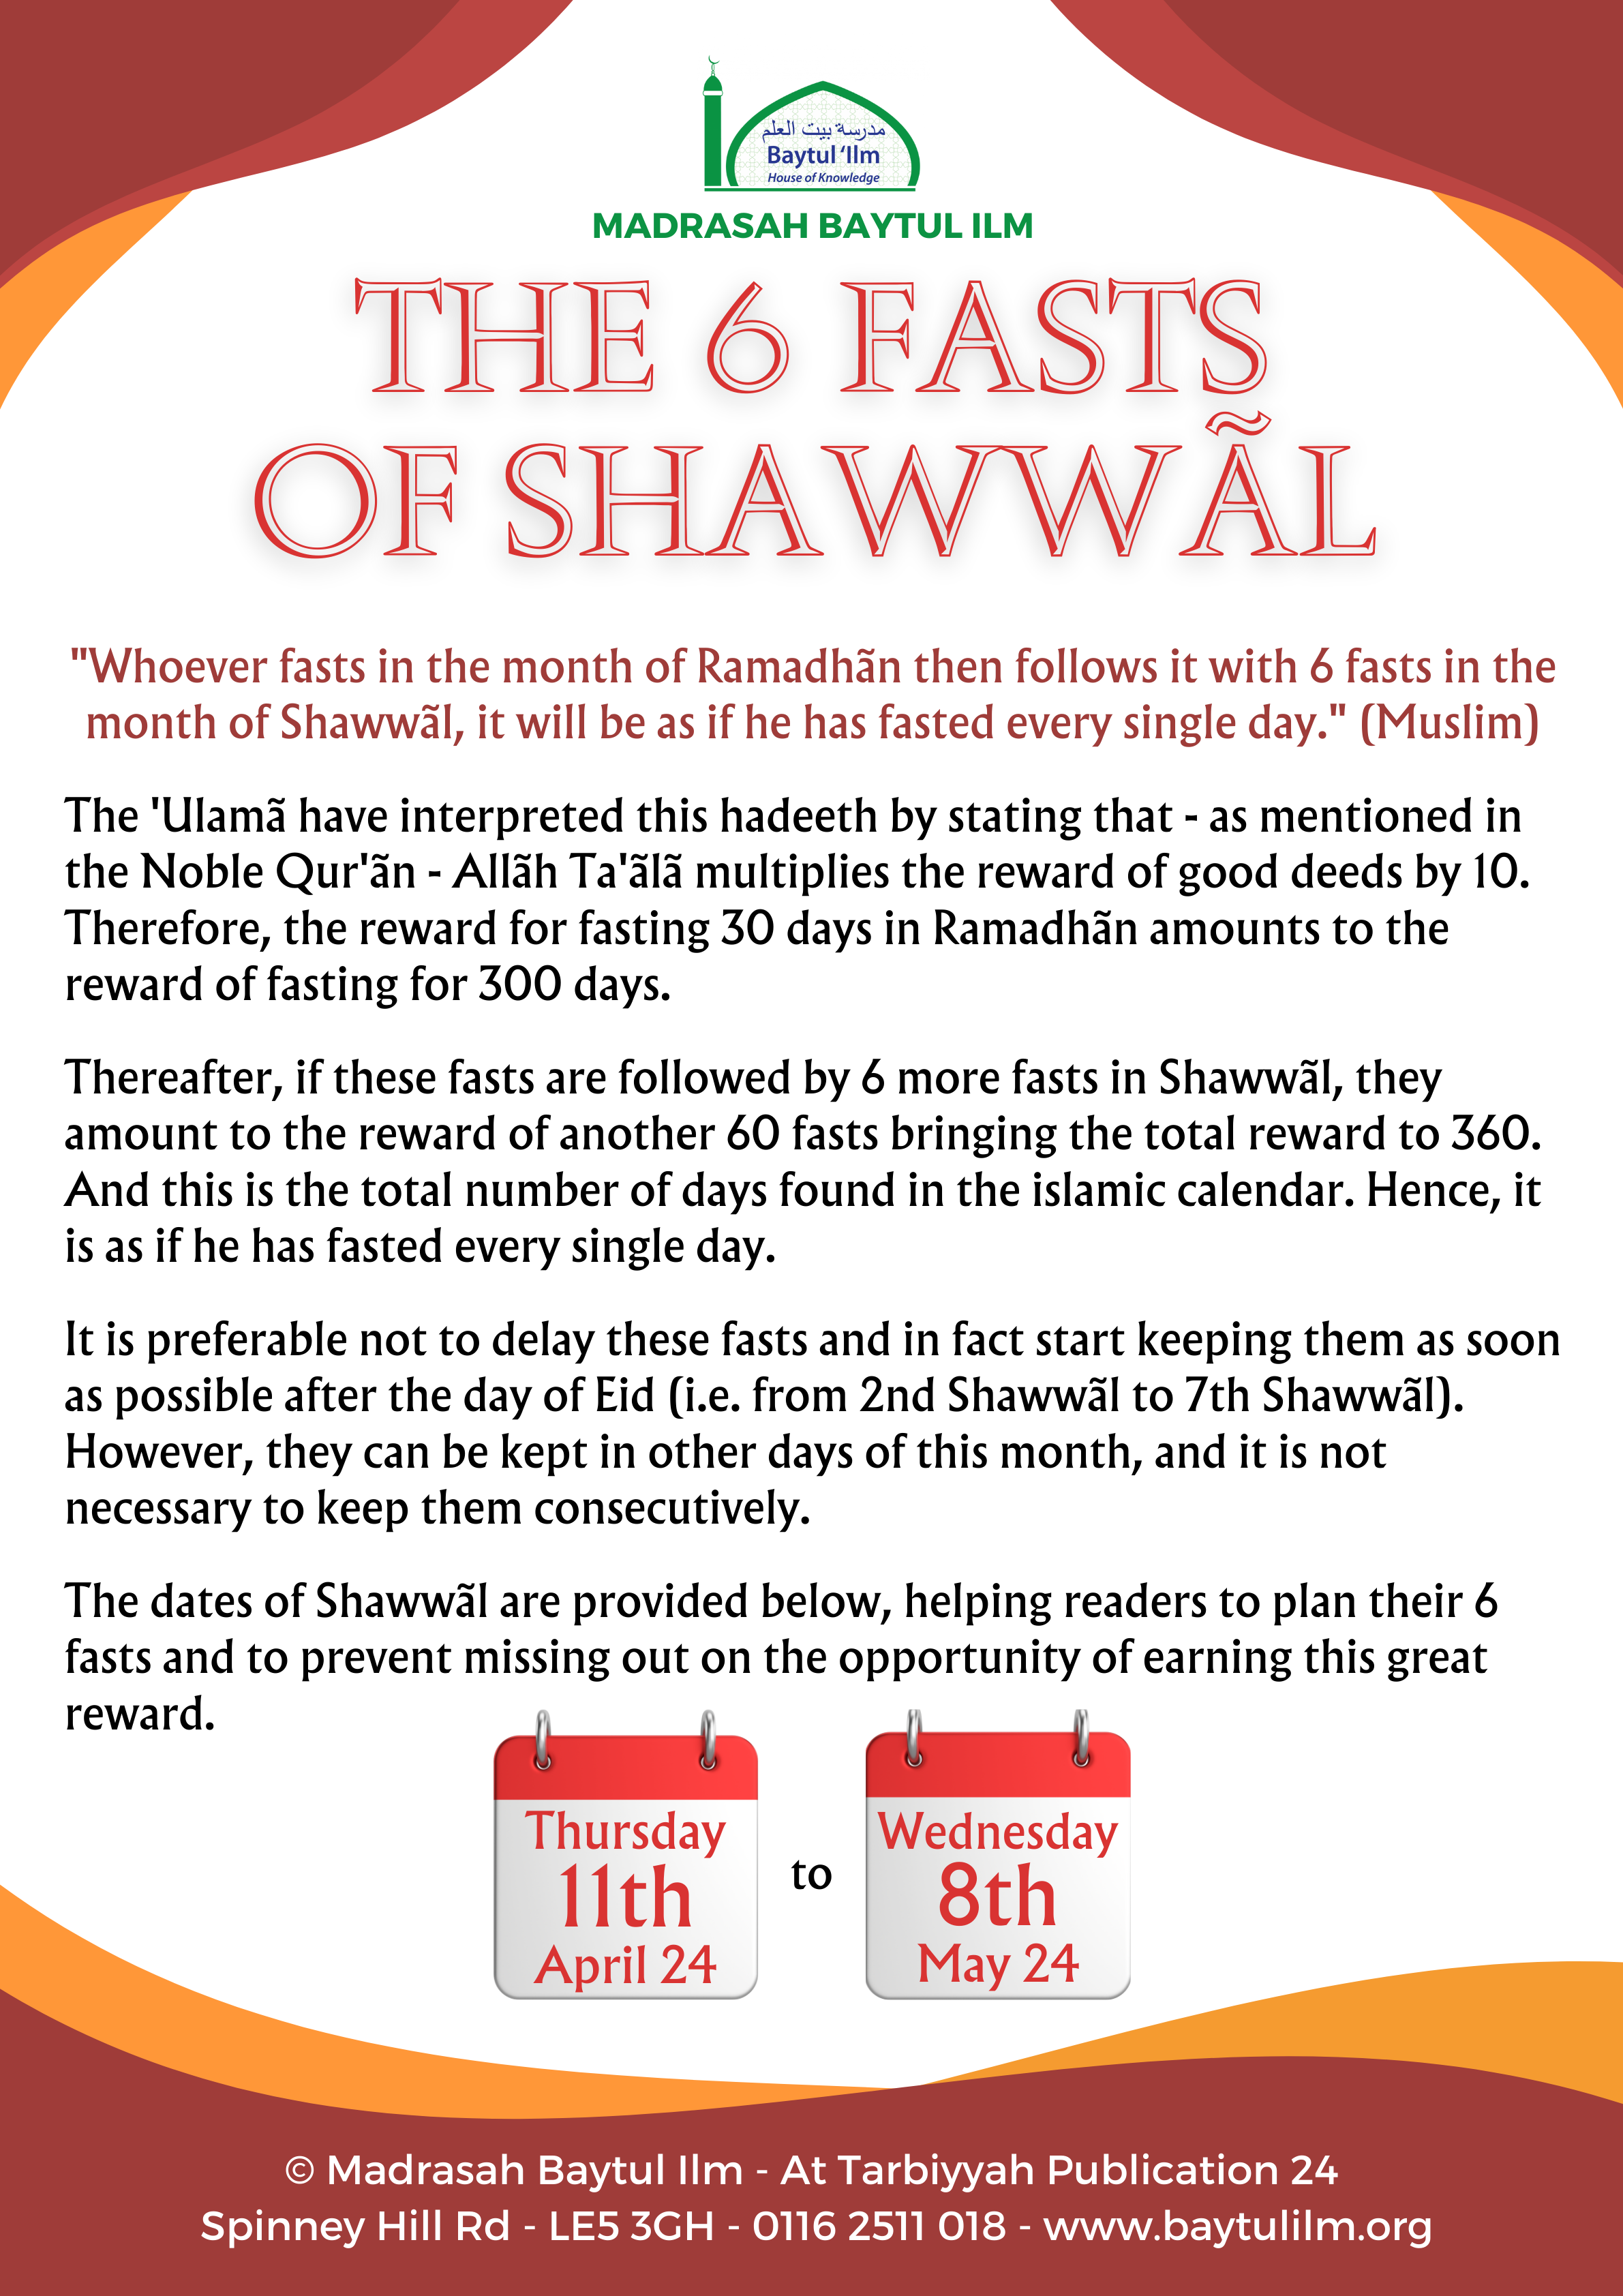 The 6 fasts of shawwal